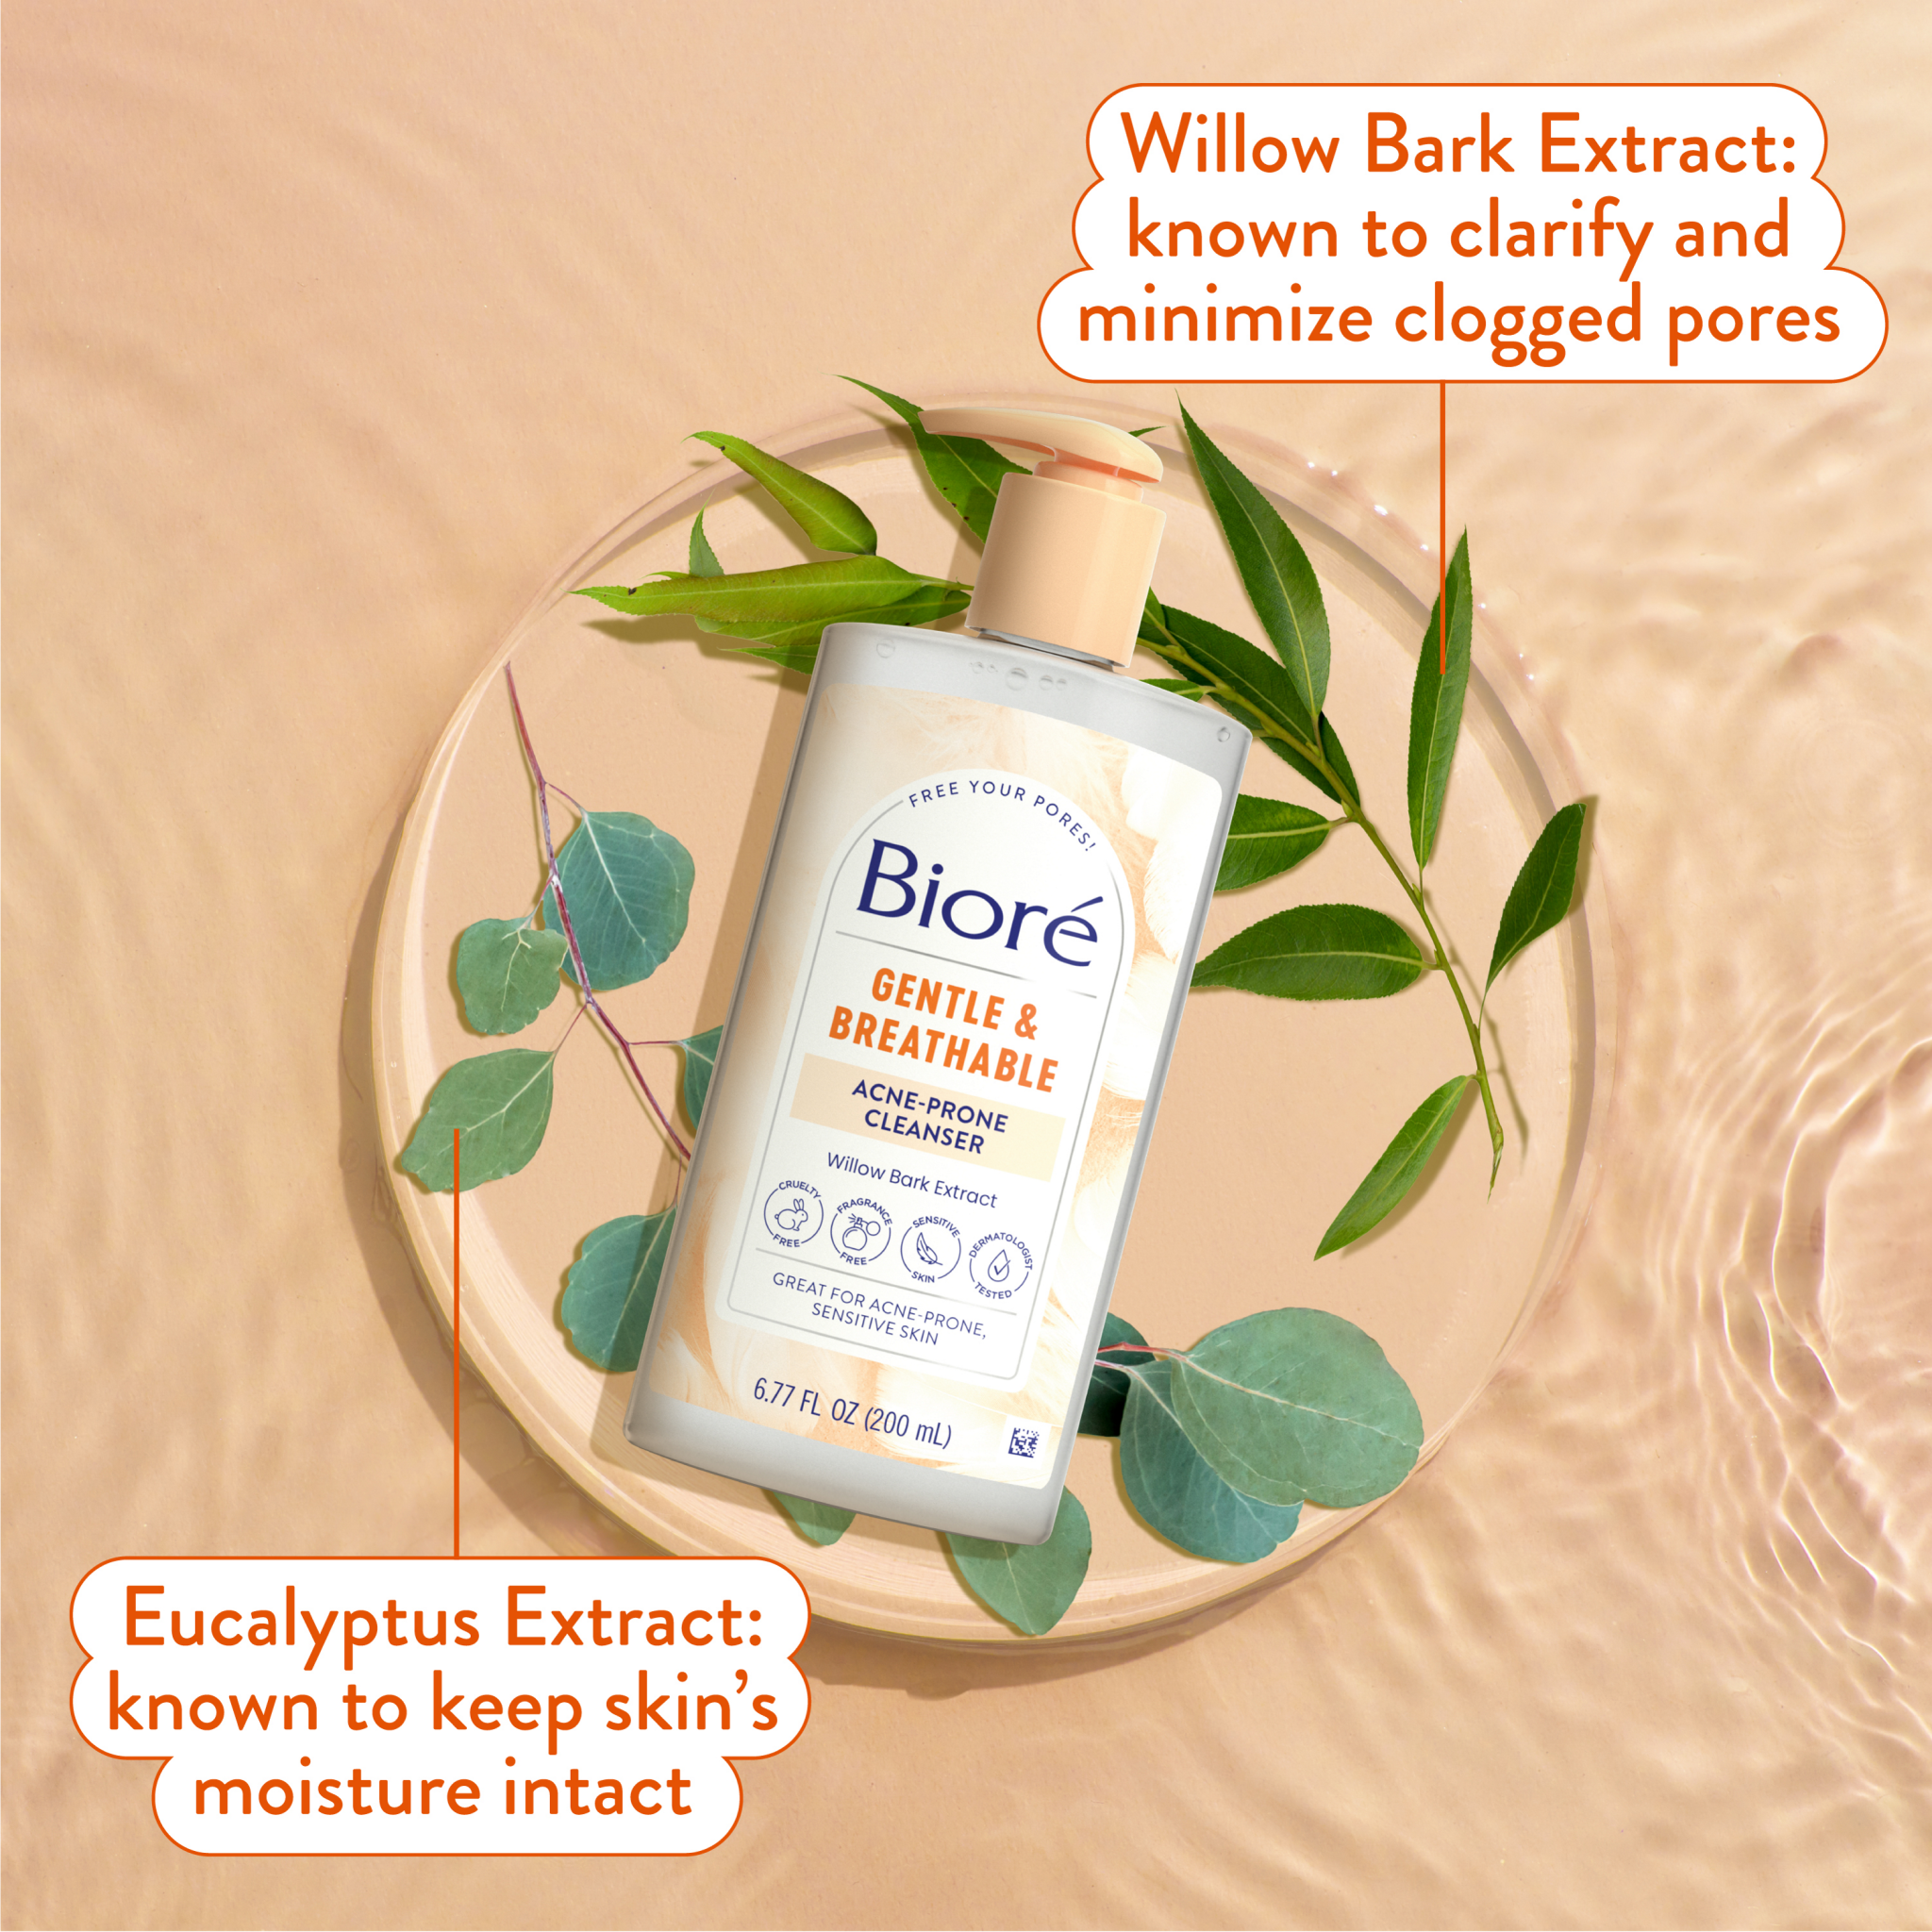 Gentle & Breathable Acne-Prone Cleanser